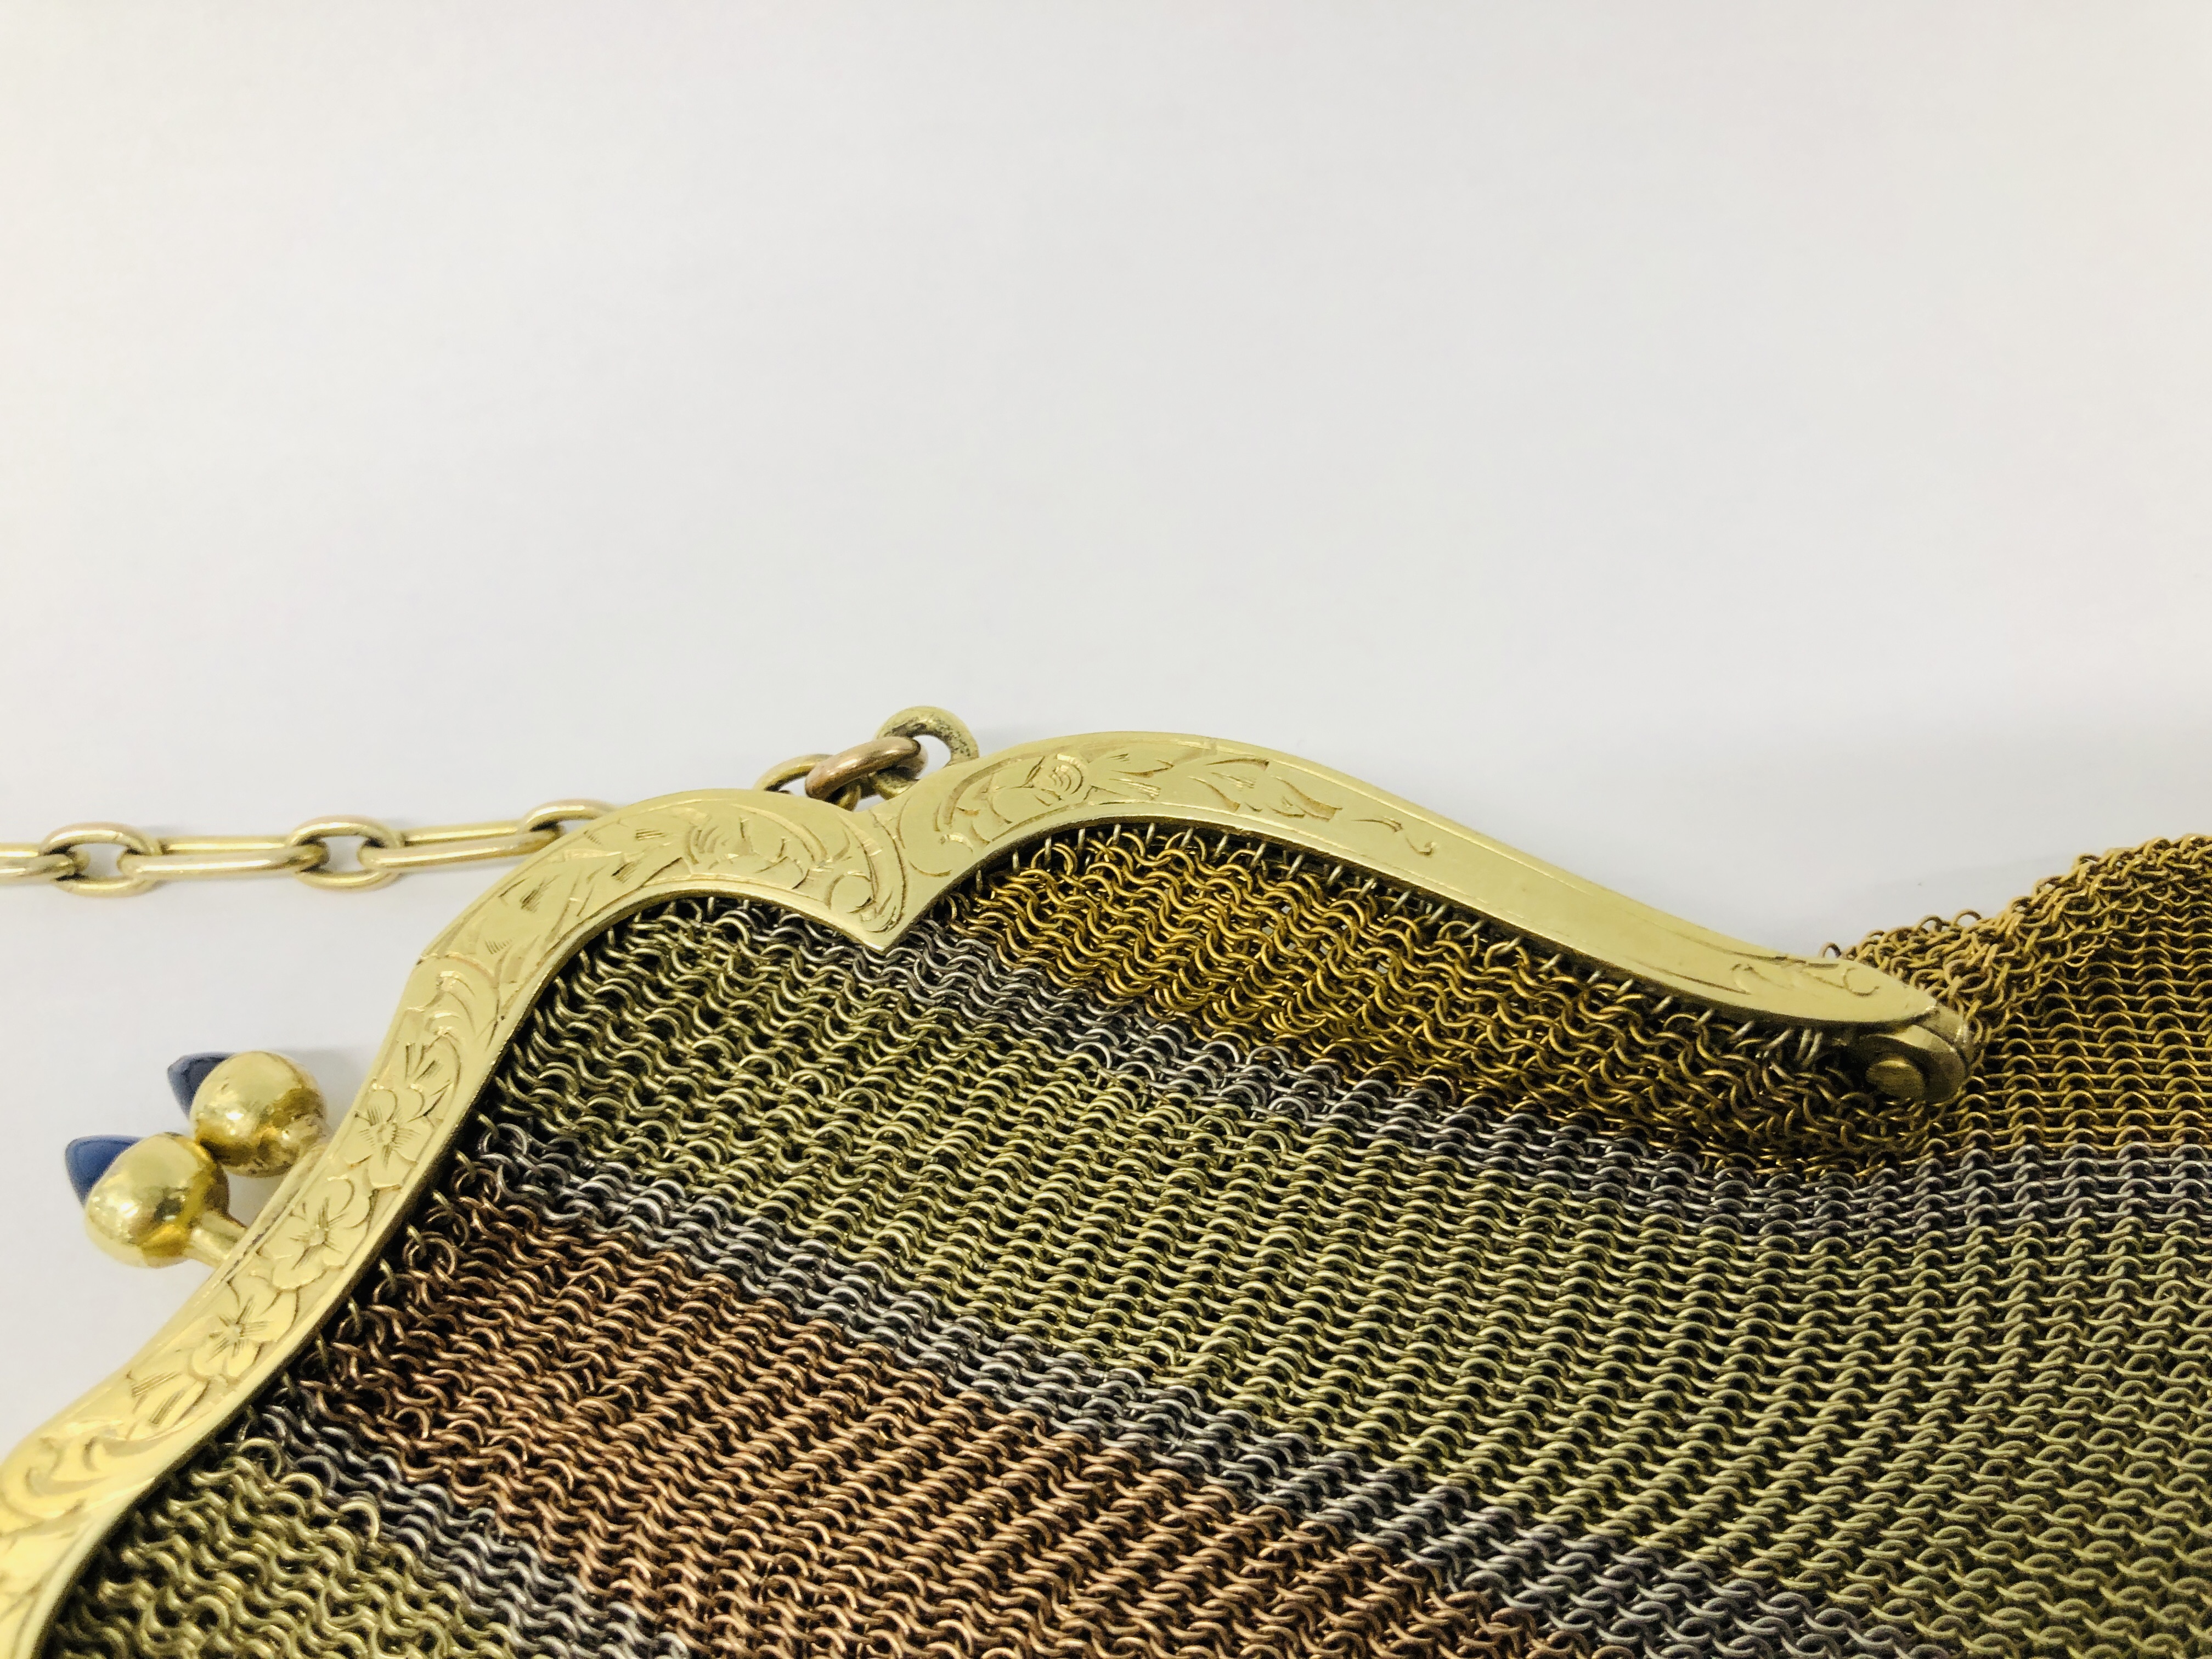 VINTAGE CHAIN MAIL PURSES YELLOW METAL TRI-COLOURED DESIGN (INDISTINCT MARKS). - Image 4 of 10